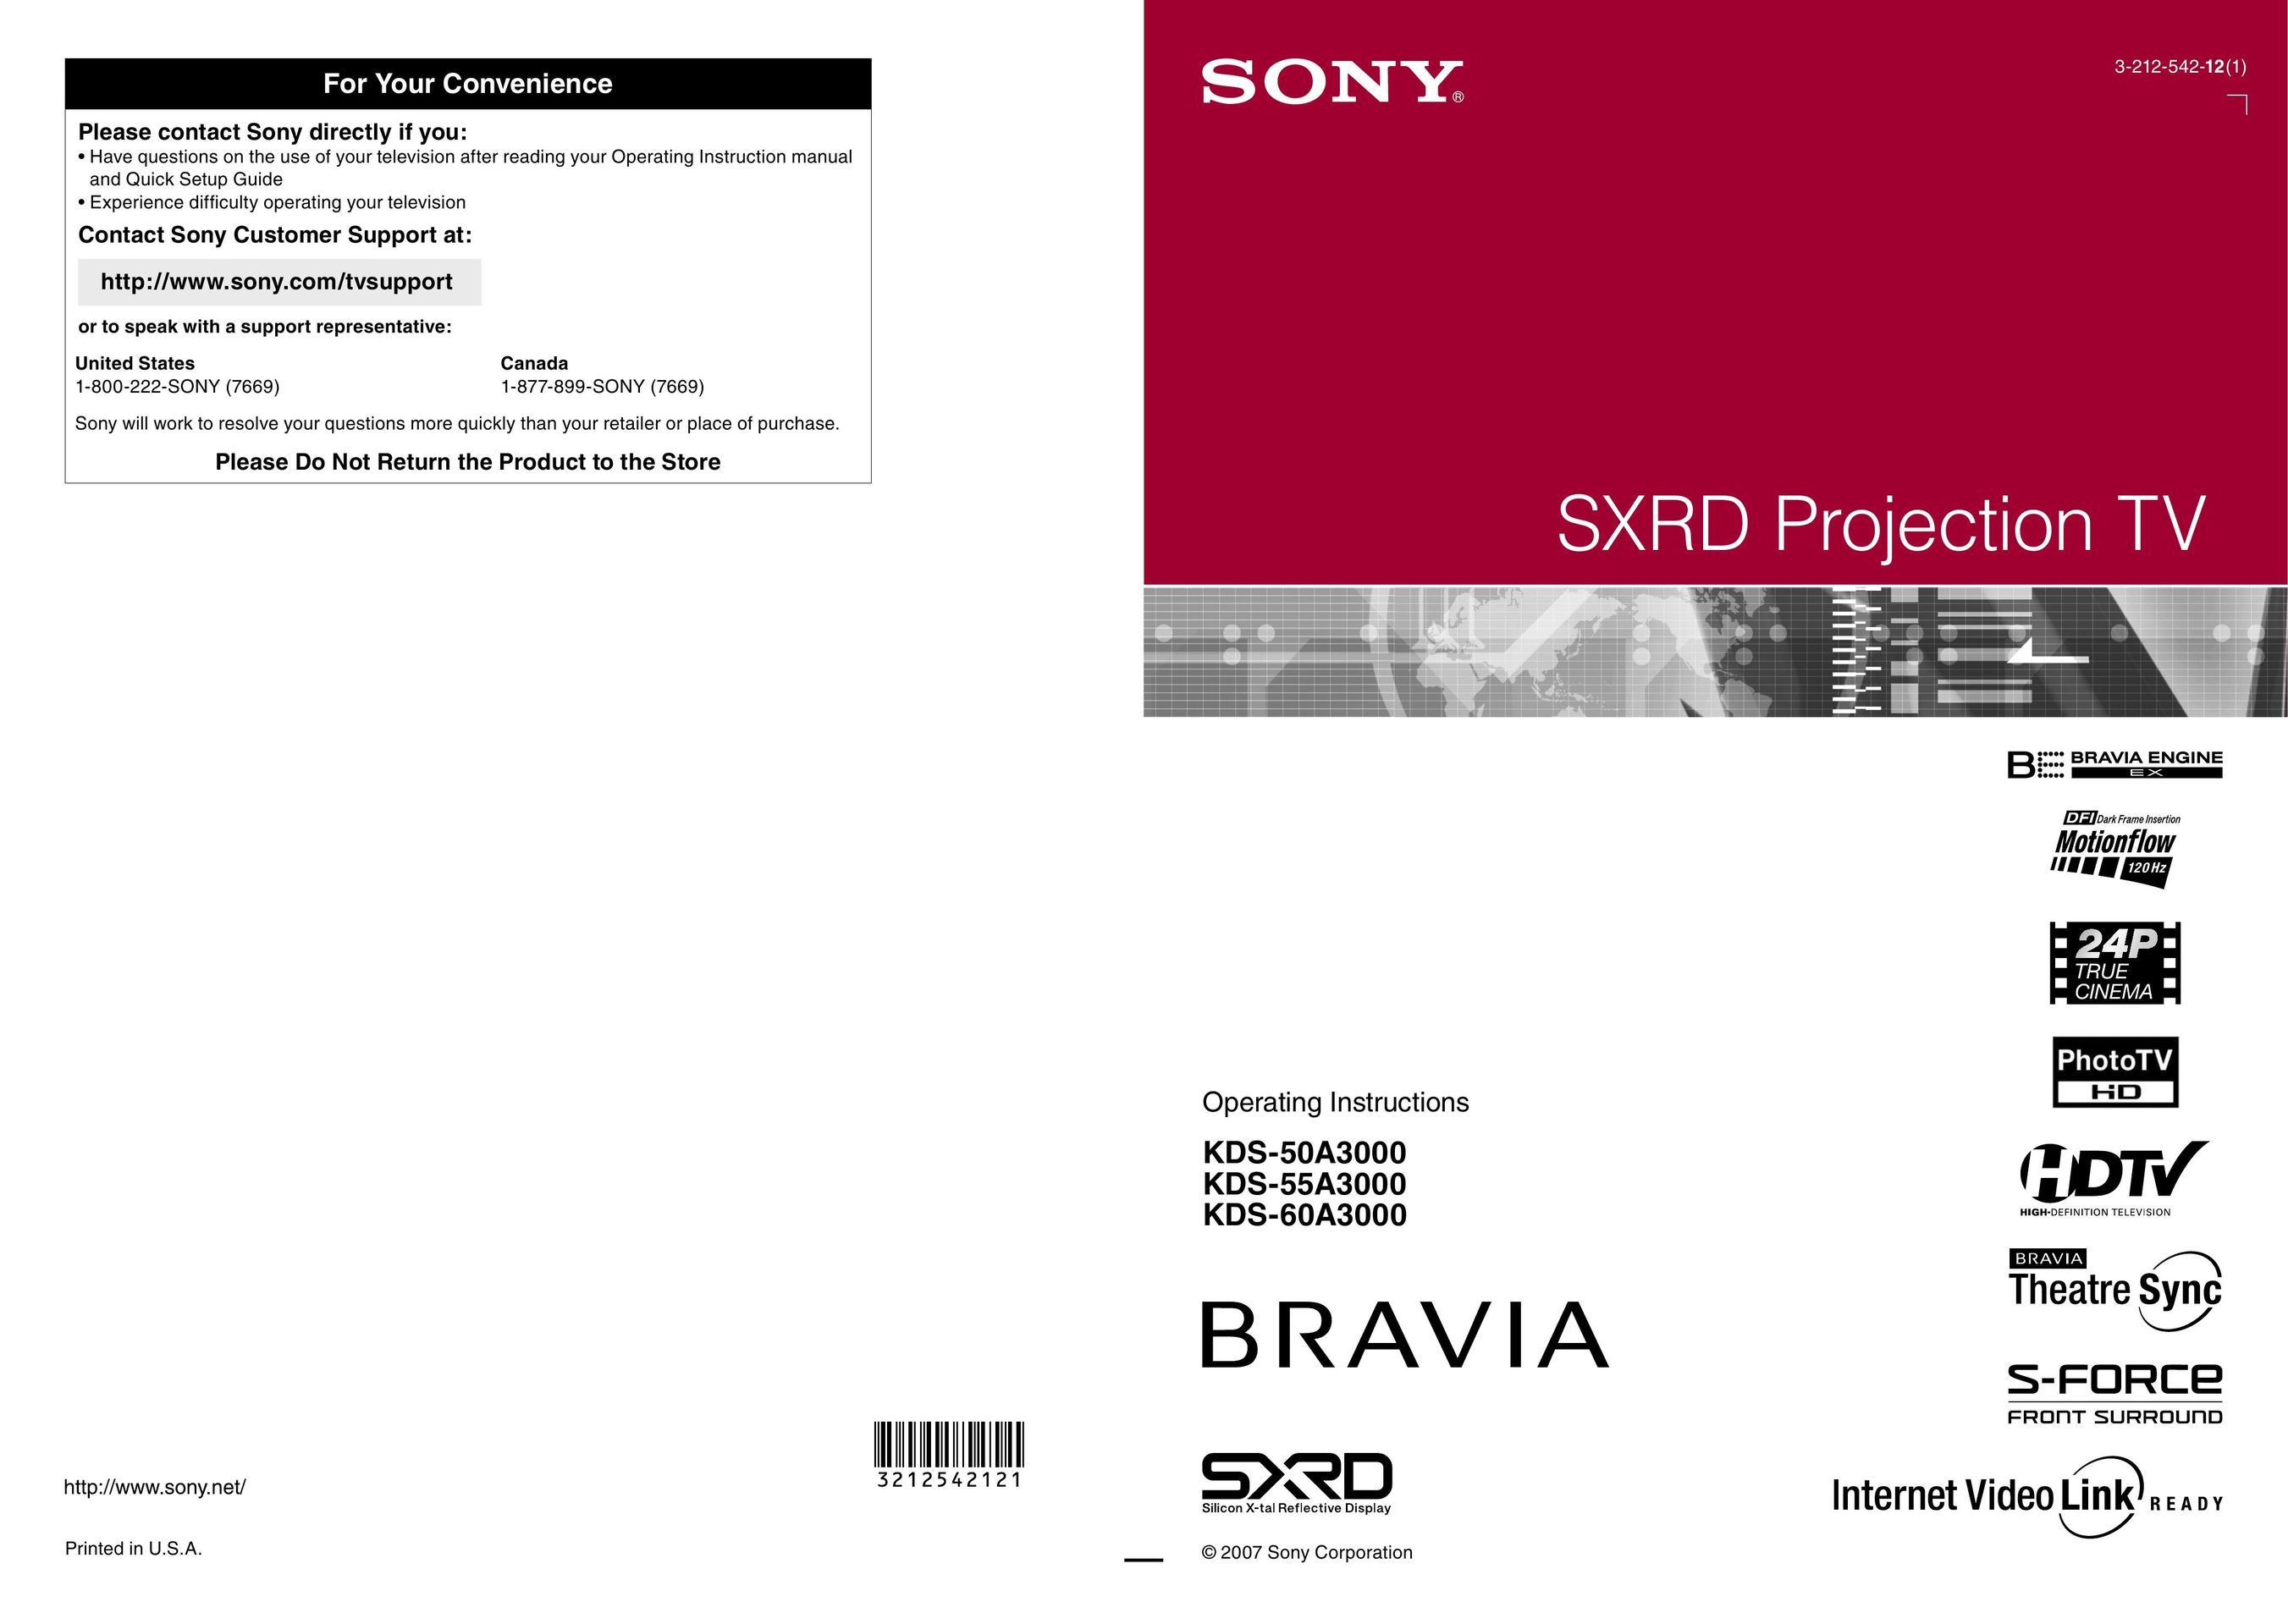 Sony KDS-55A3000, KDS-50A3000, KDS-60A3000 Projection Television User Manual